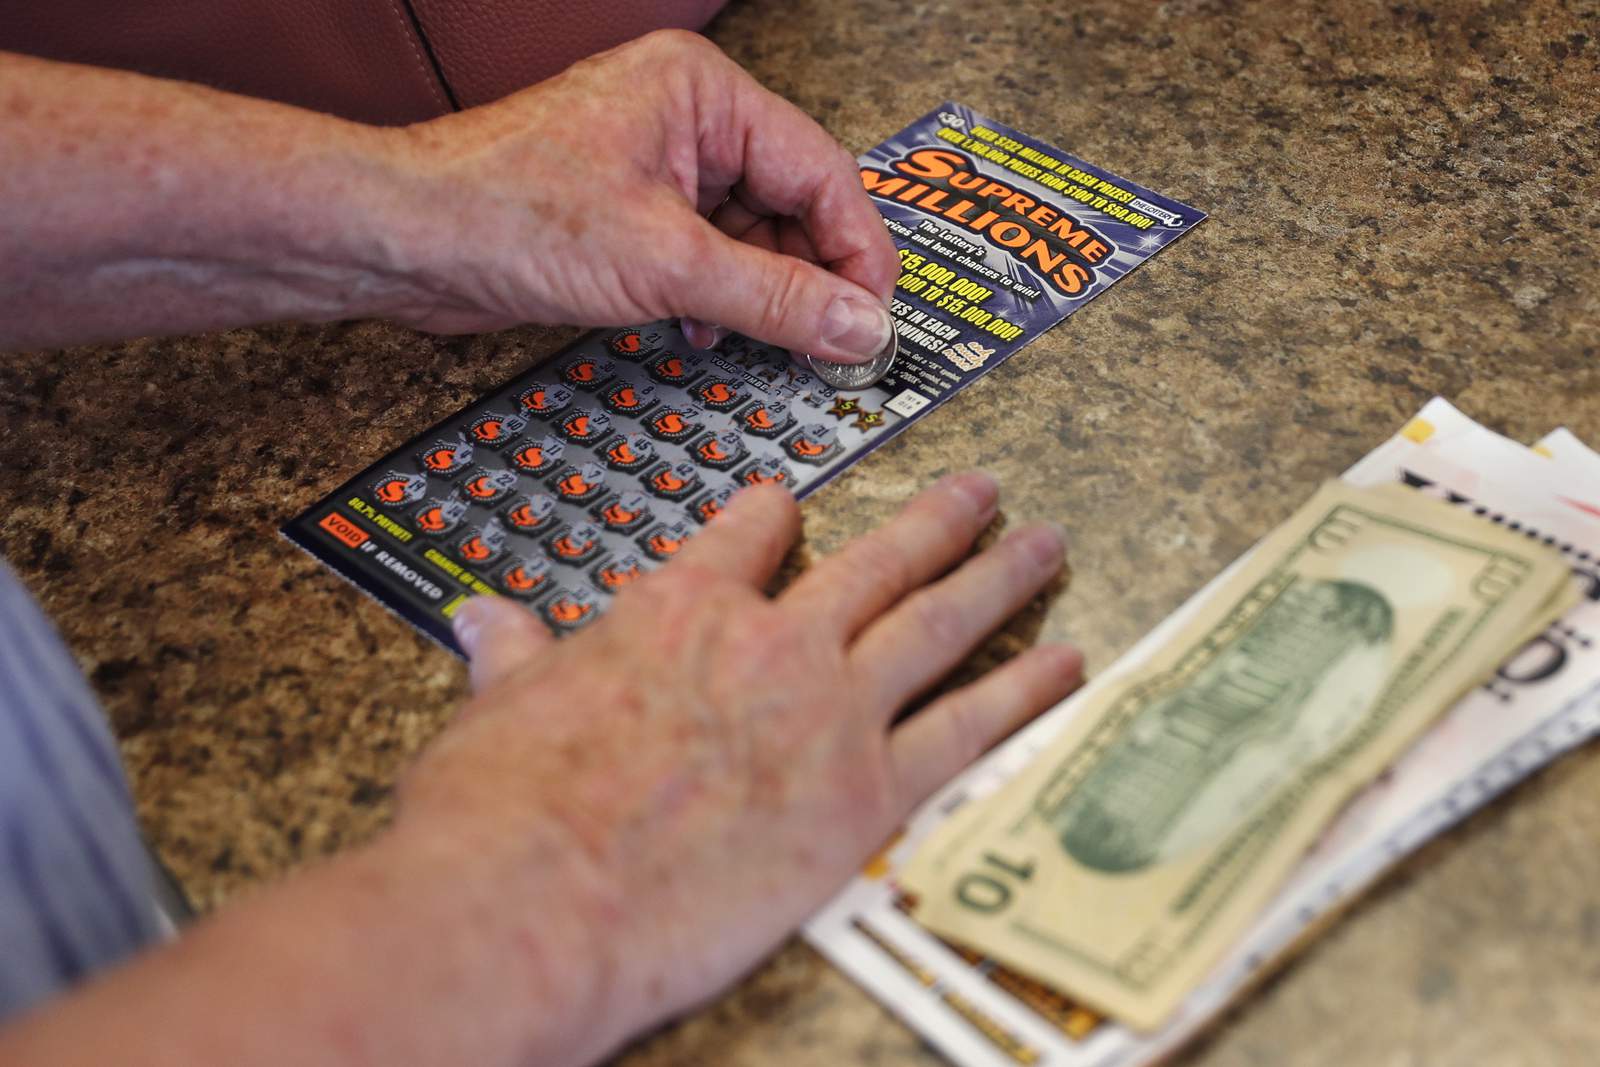 Virus causes uncertainty for state lotteries